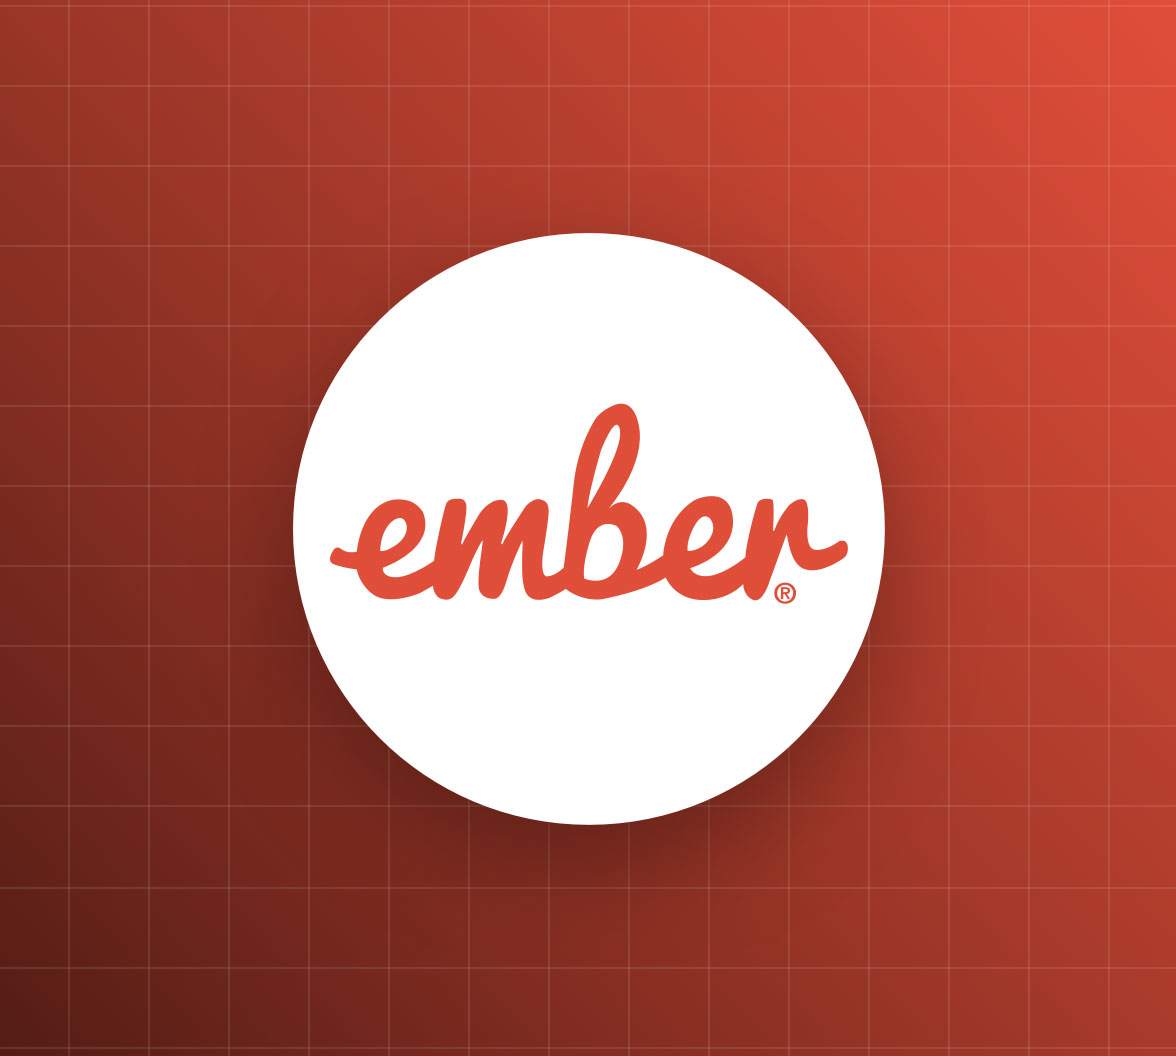 25 Private Server Codes For Ember